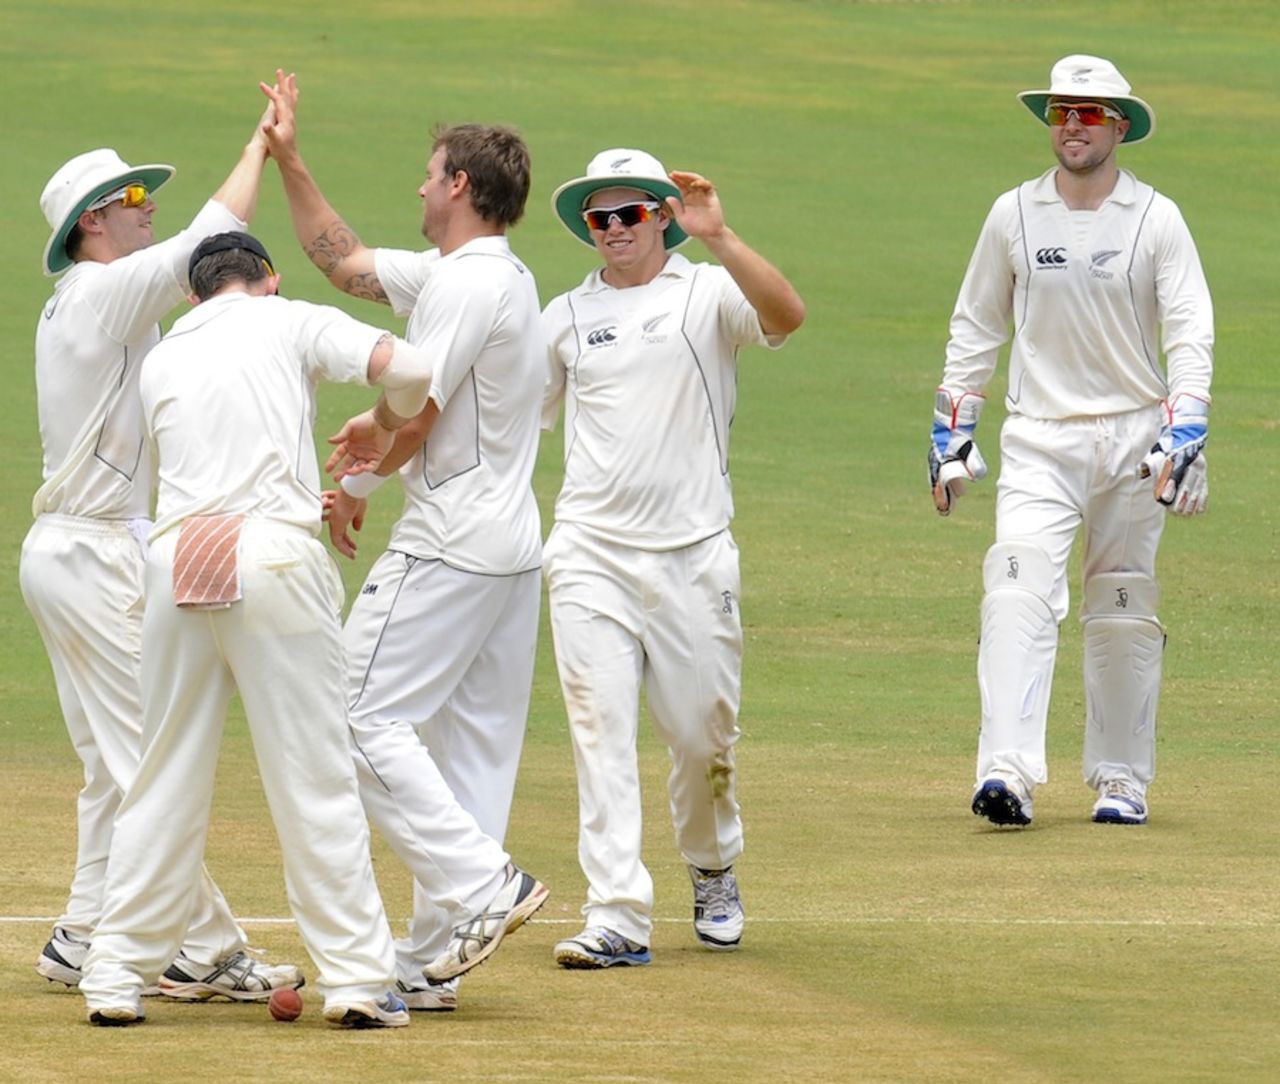 Doug Bracewell is congratulated after taking a wicket, India A v New Zealand A, 2nd unofficial Test, 3rd day, Visakhapatnam, September 4, 2013